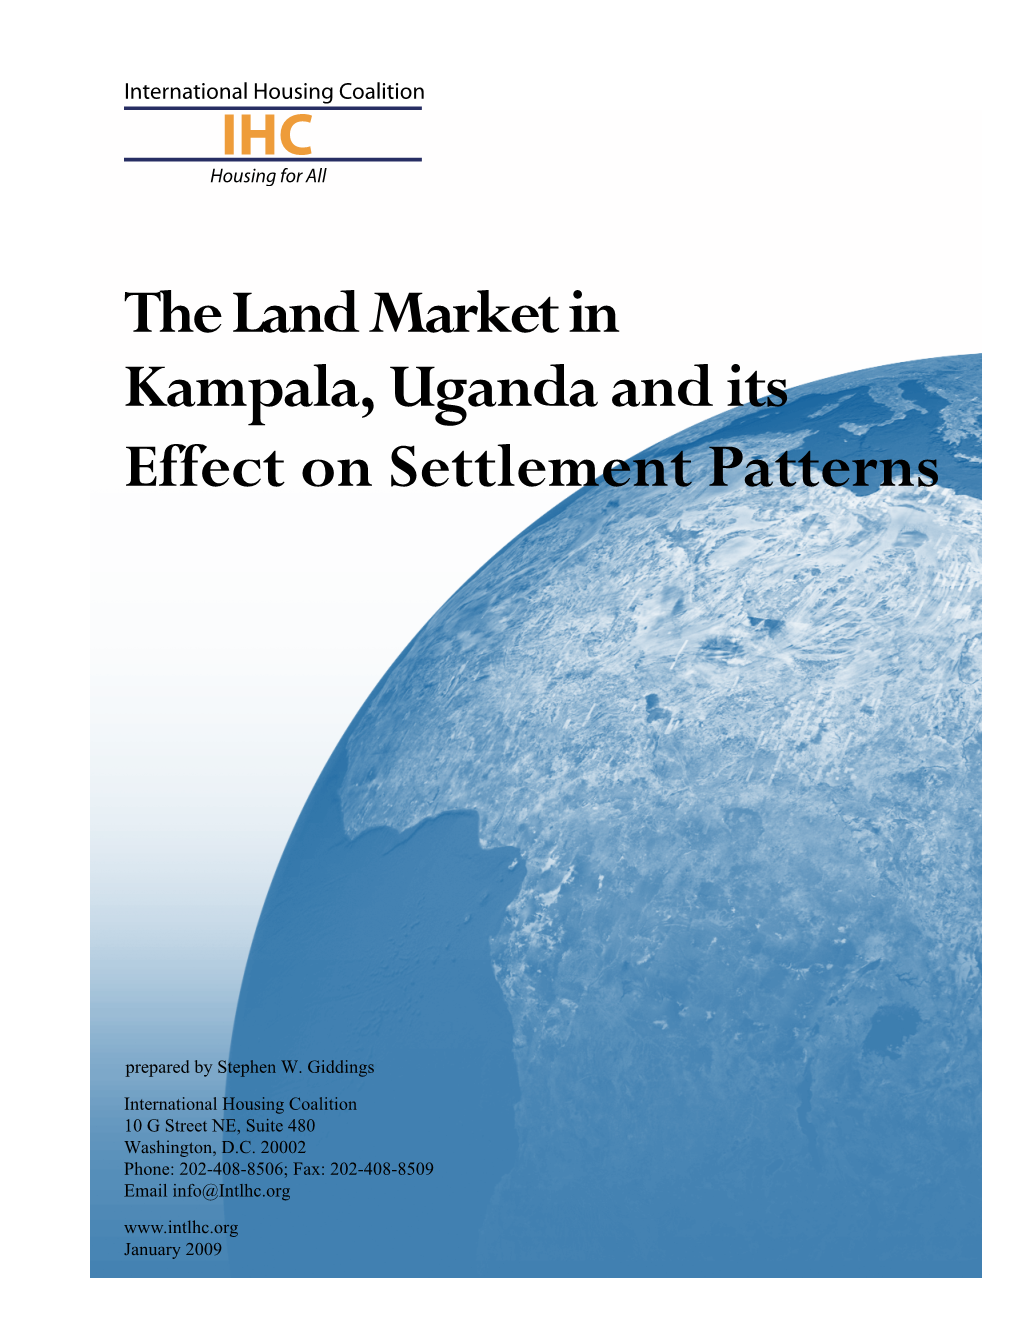 The Land Market in Kampala, Uganda and Its Effect on Settlement Patterns